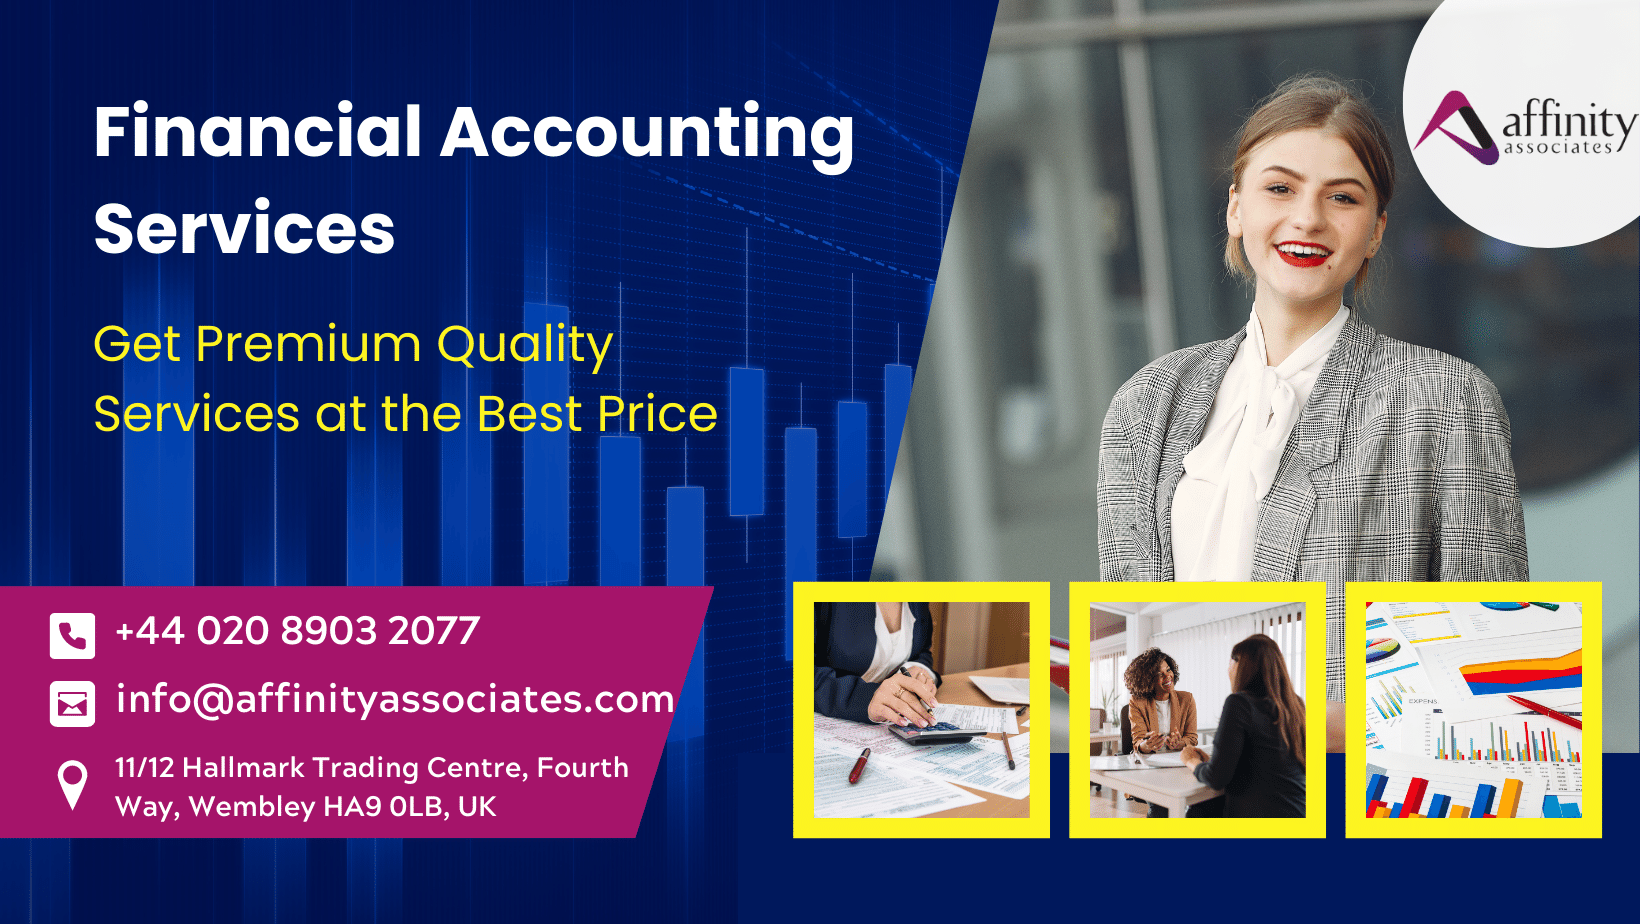 Financial Accounting Services – Get Premium Quality Services at the Best Price